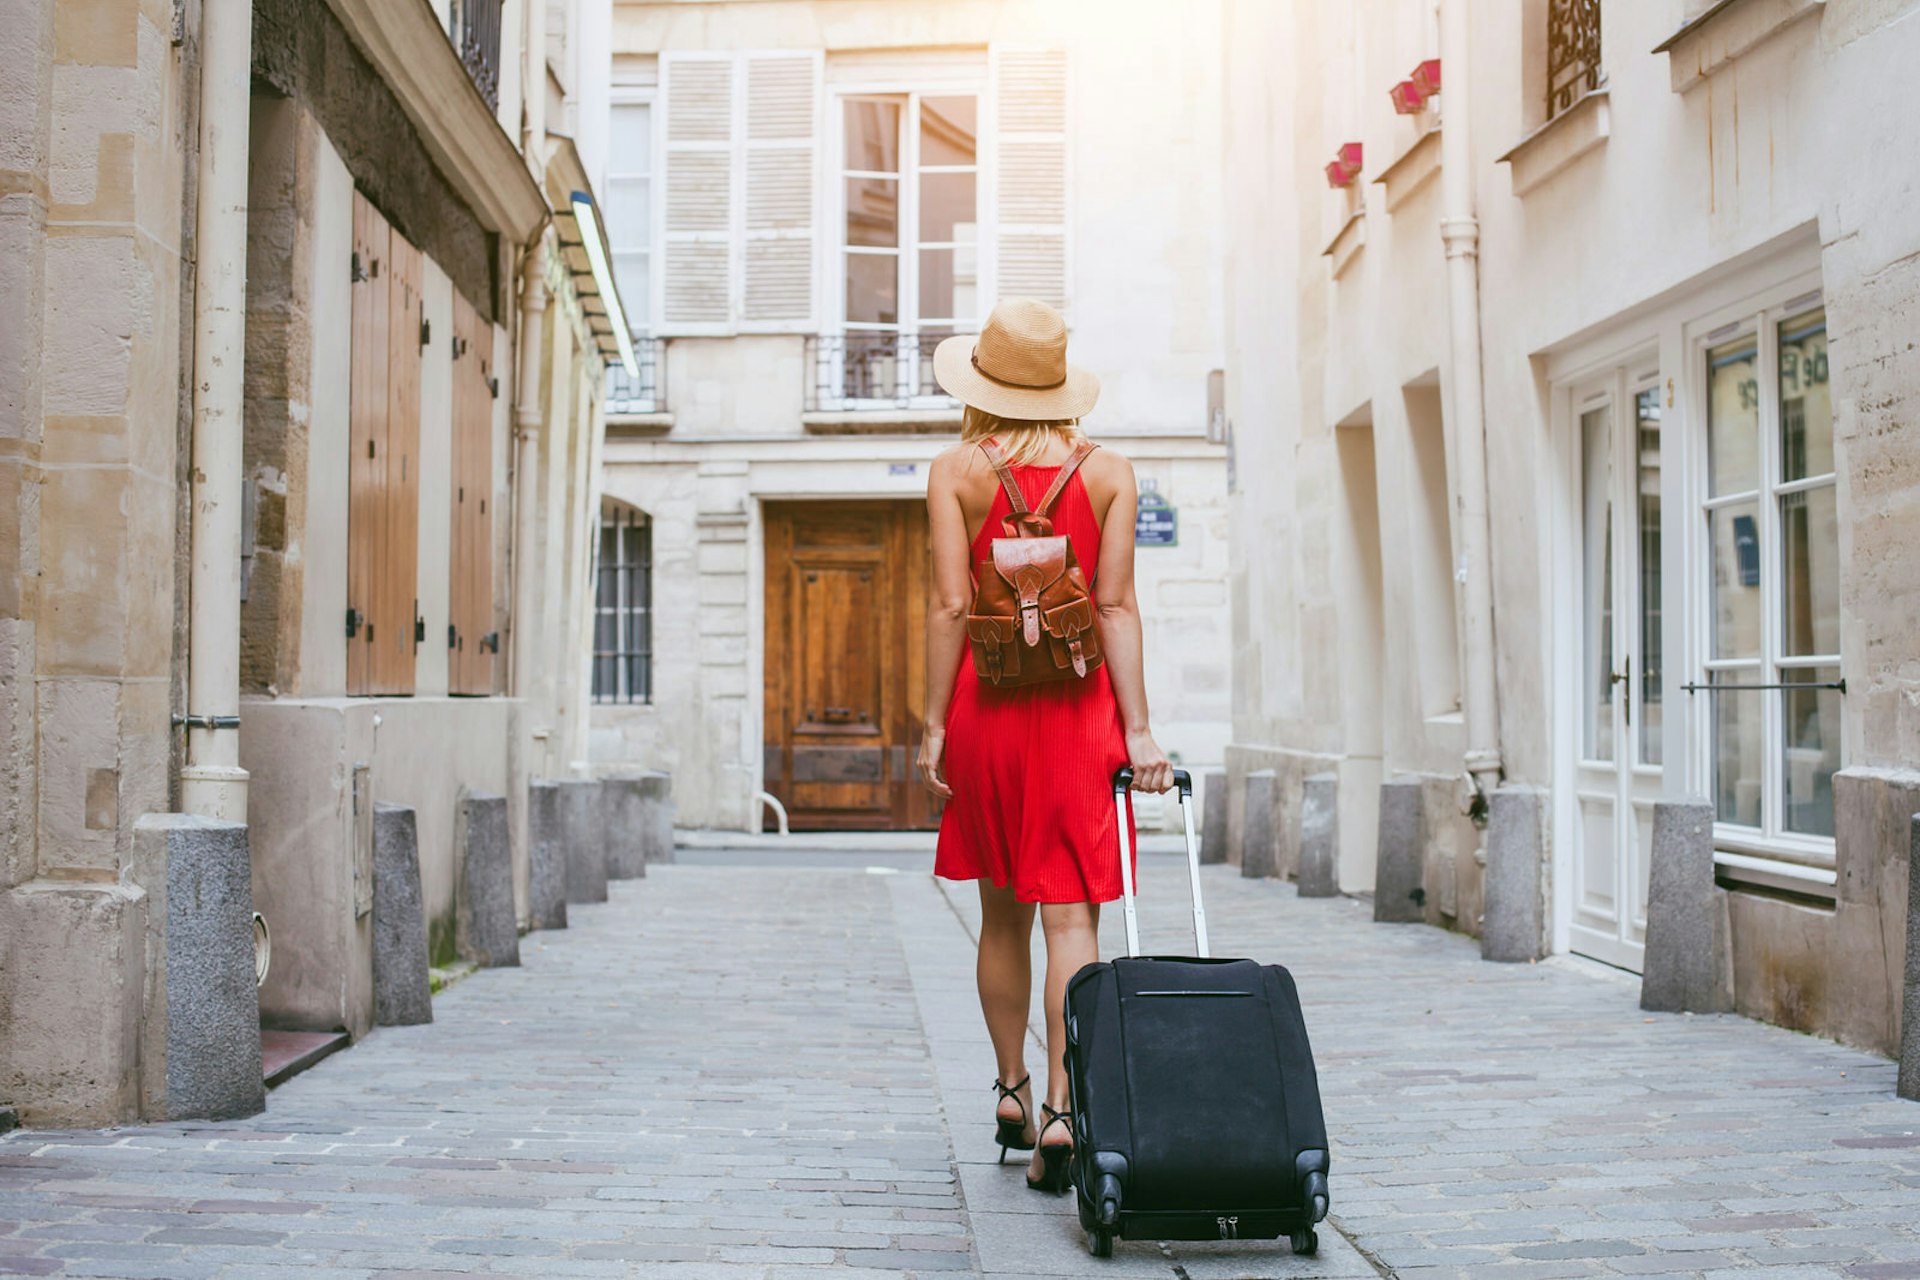 Travel predictions for 2018 - a woman walks down a street with a suitcase in Paris © Ditty_about_summer / Shutterstock